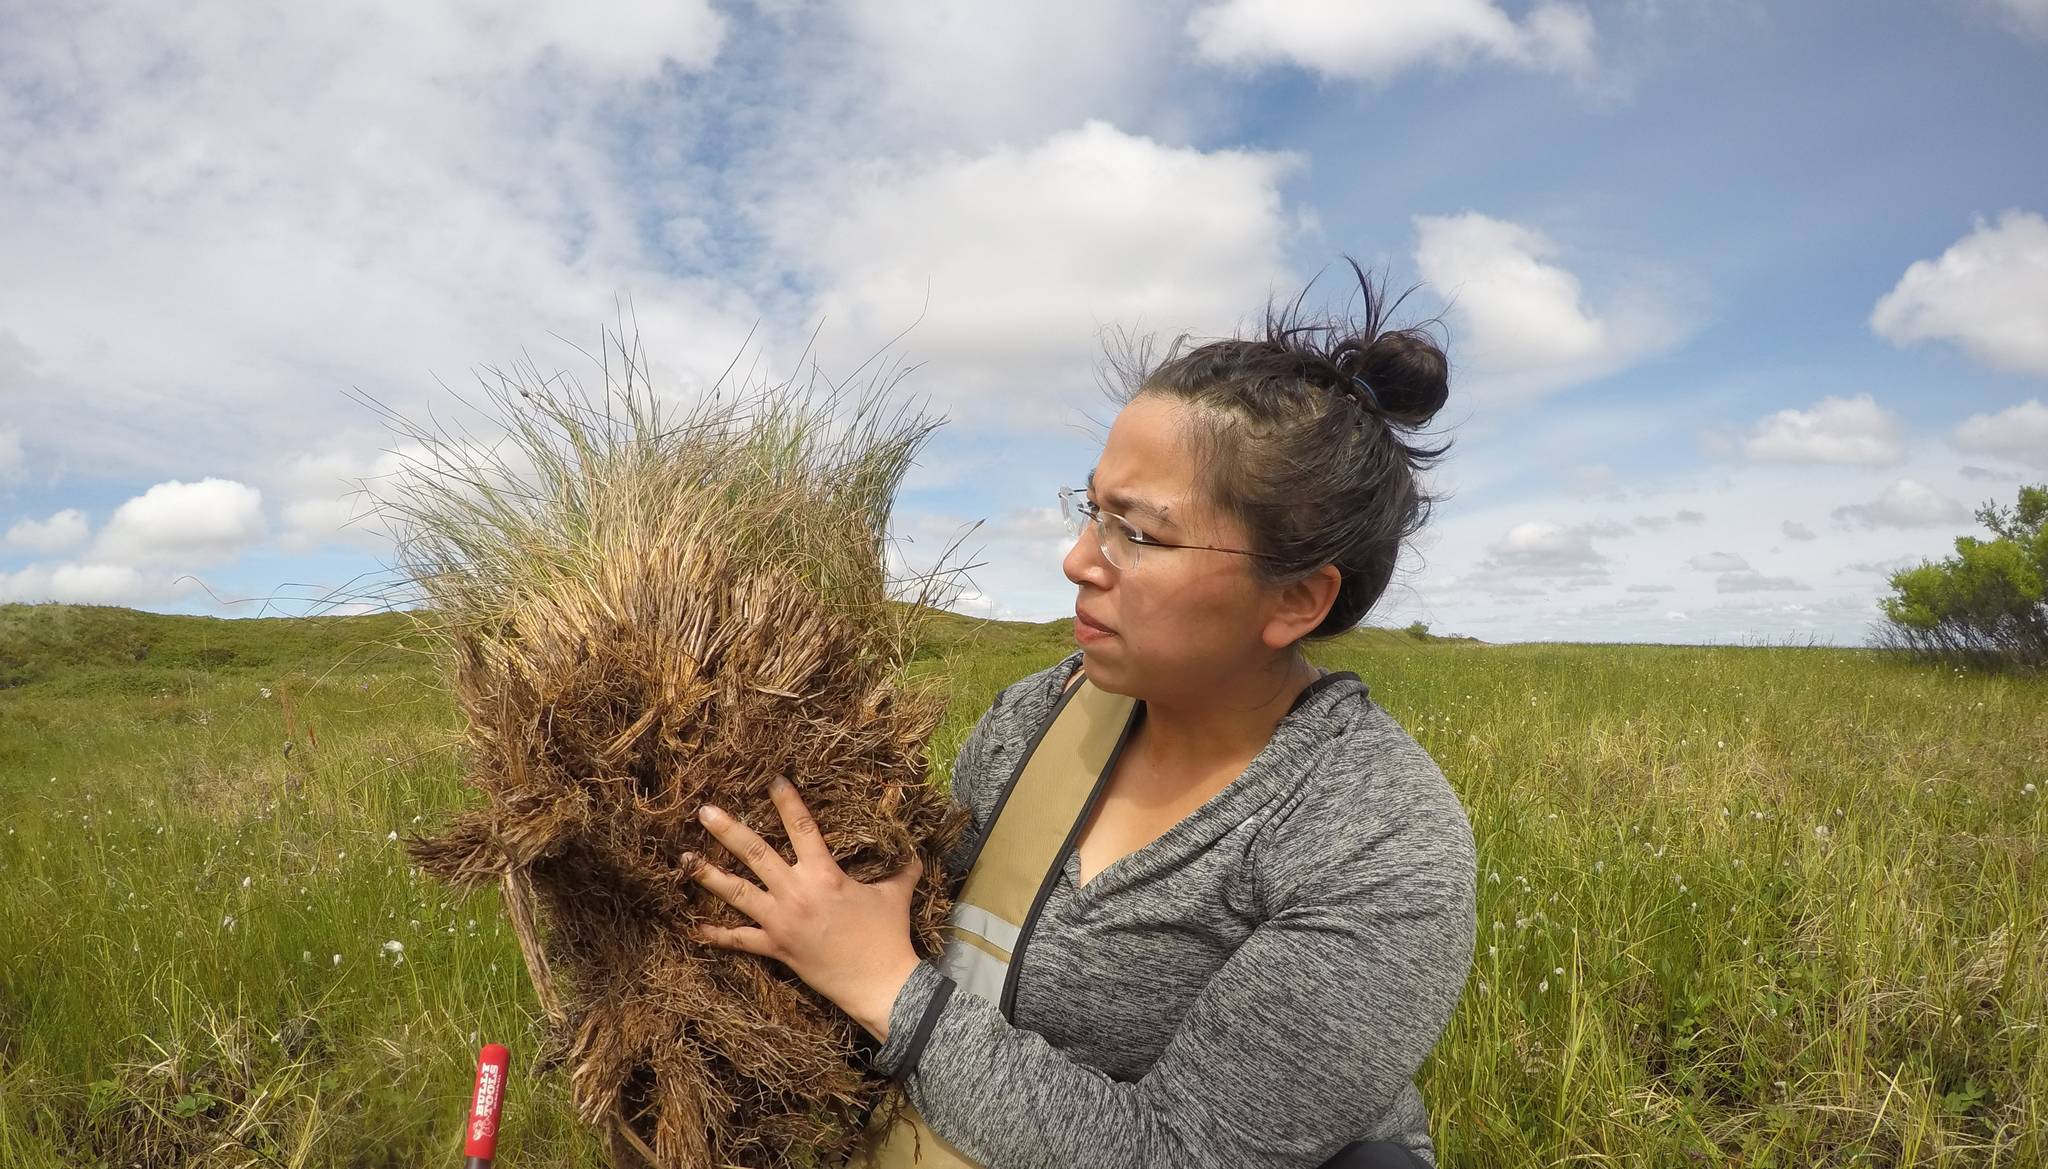 Finding a tussock in a partially drained lake, removed by a muskox who used the area as a sanctuary to cool down from the summer heat. (Photo by Heidi Steltzer/Polaris Project/Woods Hole Research Institute)